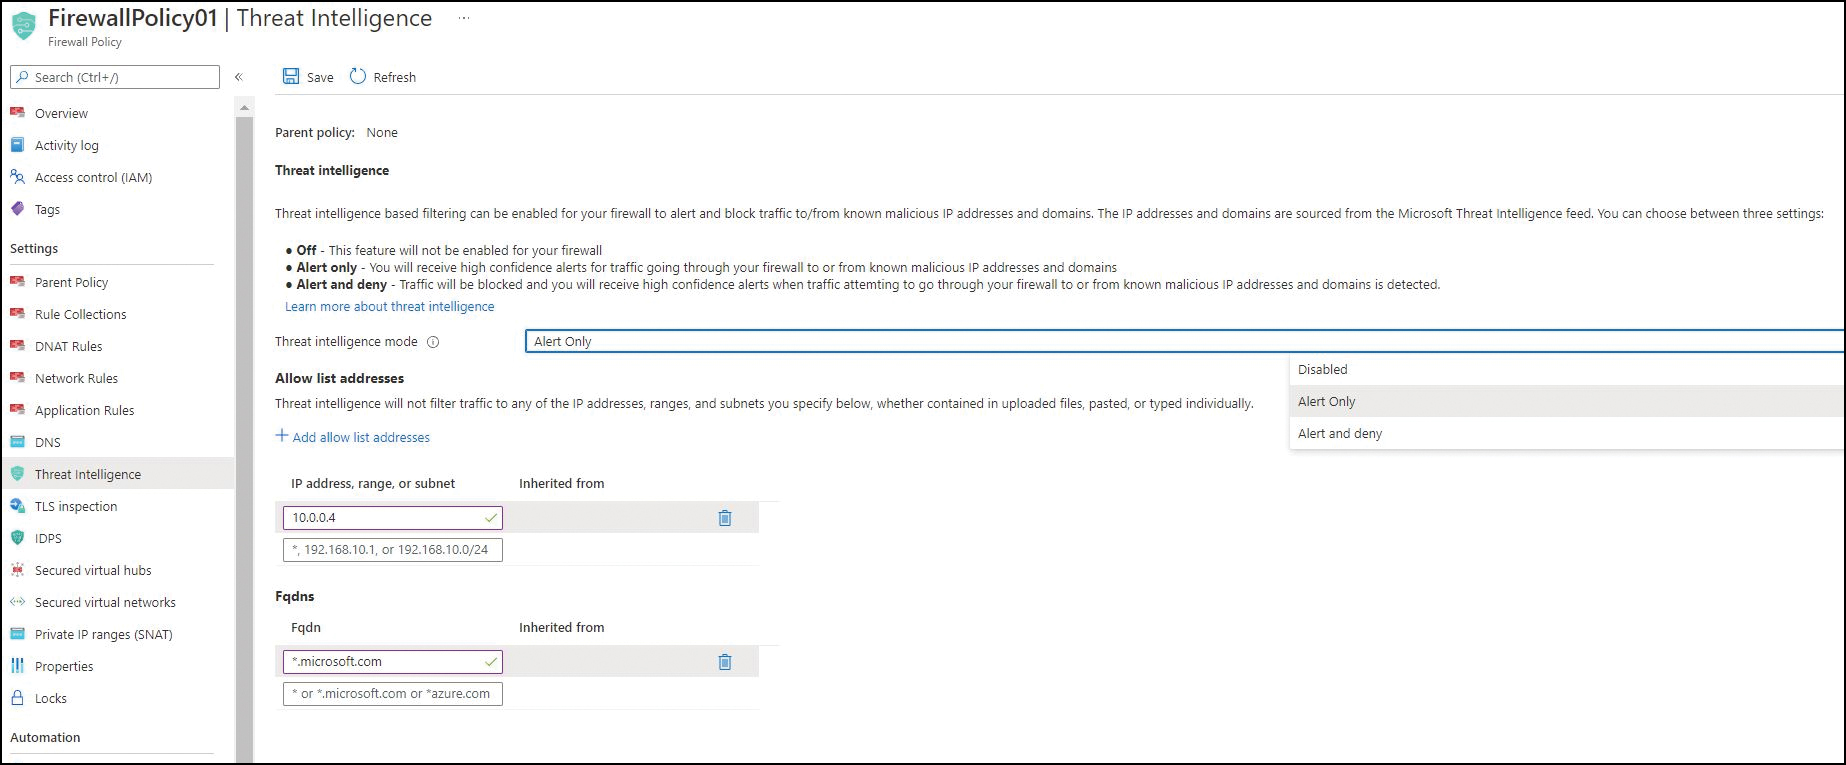 This figure shows the Threat Intelligence settings in the FirewallPolicy01 blade. Threat Intelligence mode is set to Alert Only. IP Address, Range, or Subnet is set to 10.0.0.4. FQDNs is set to *.microsoft.com.